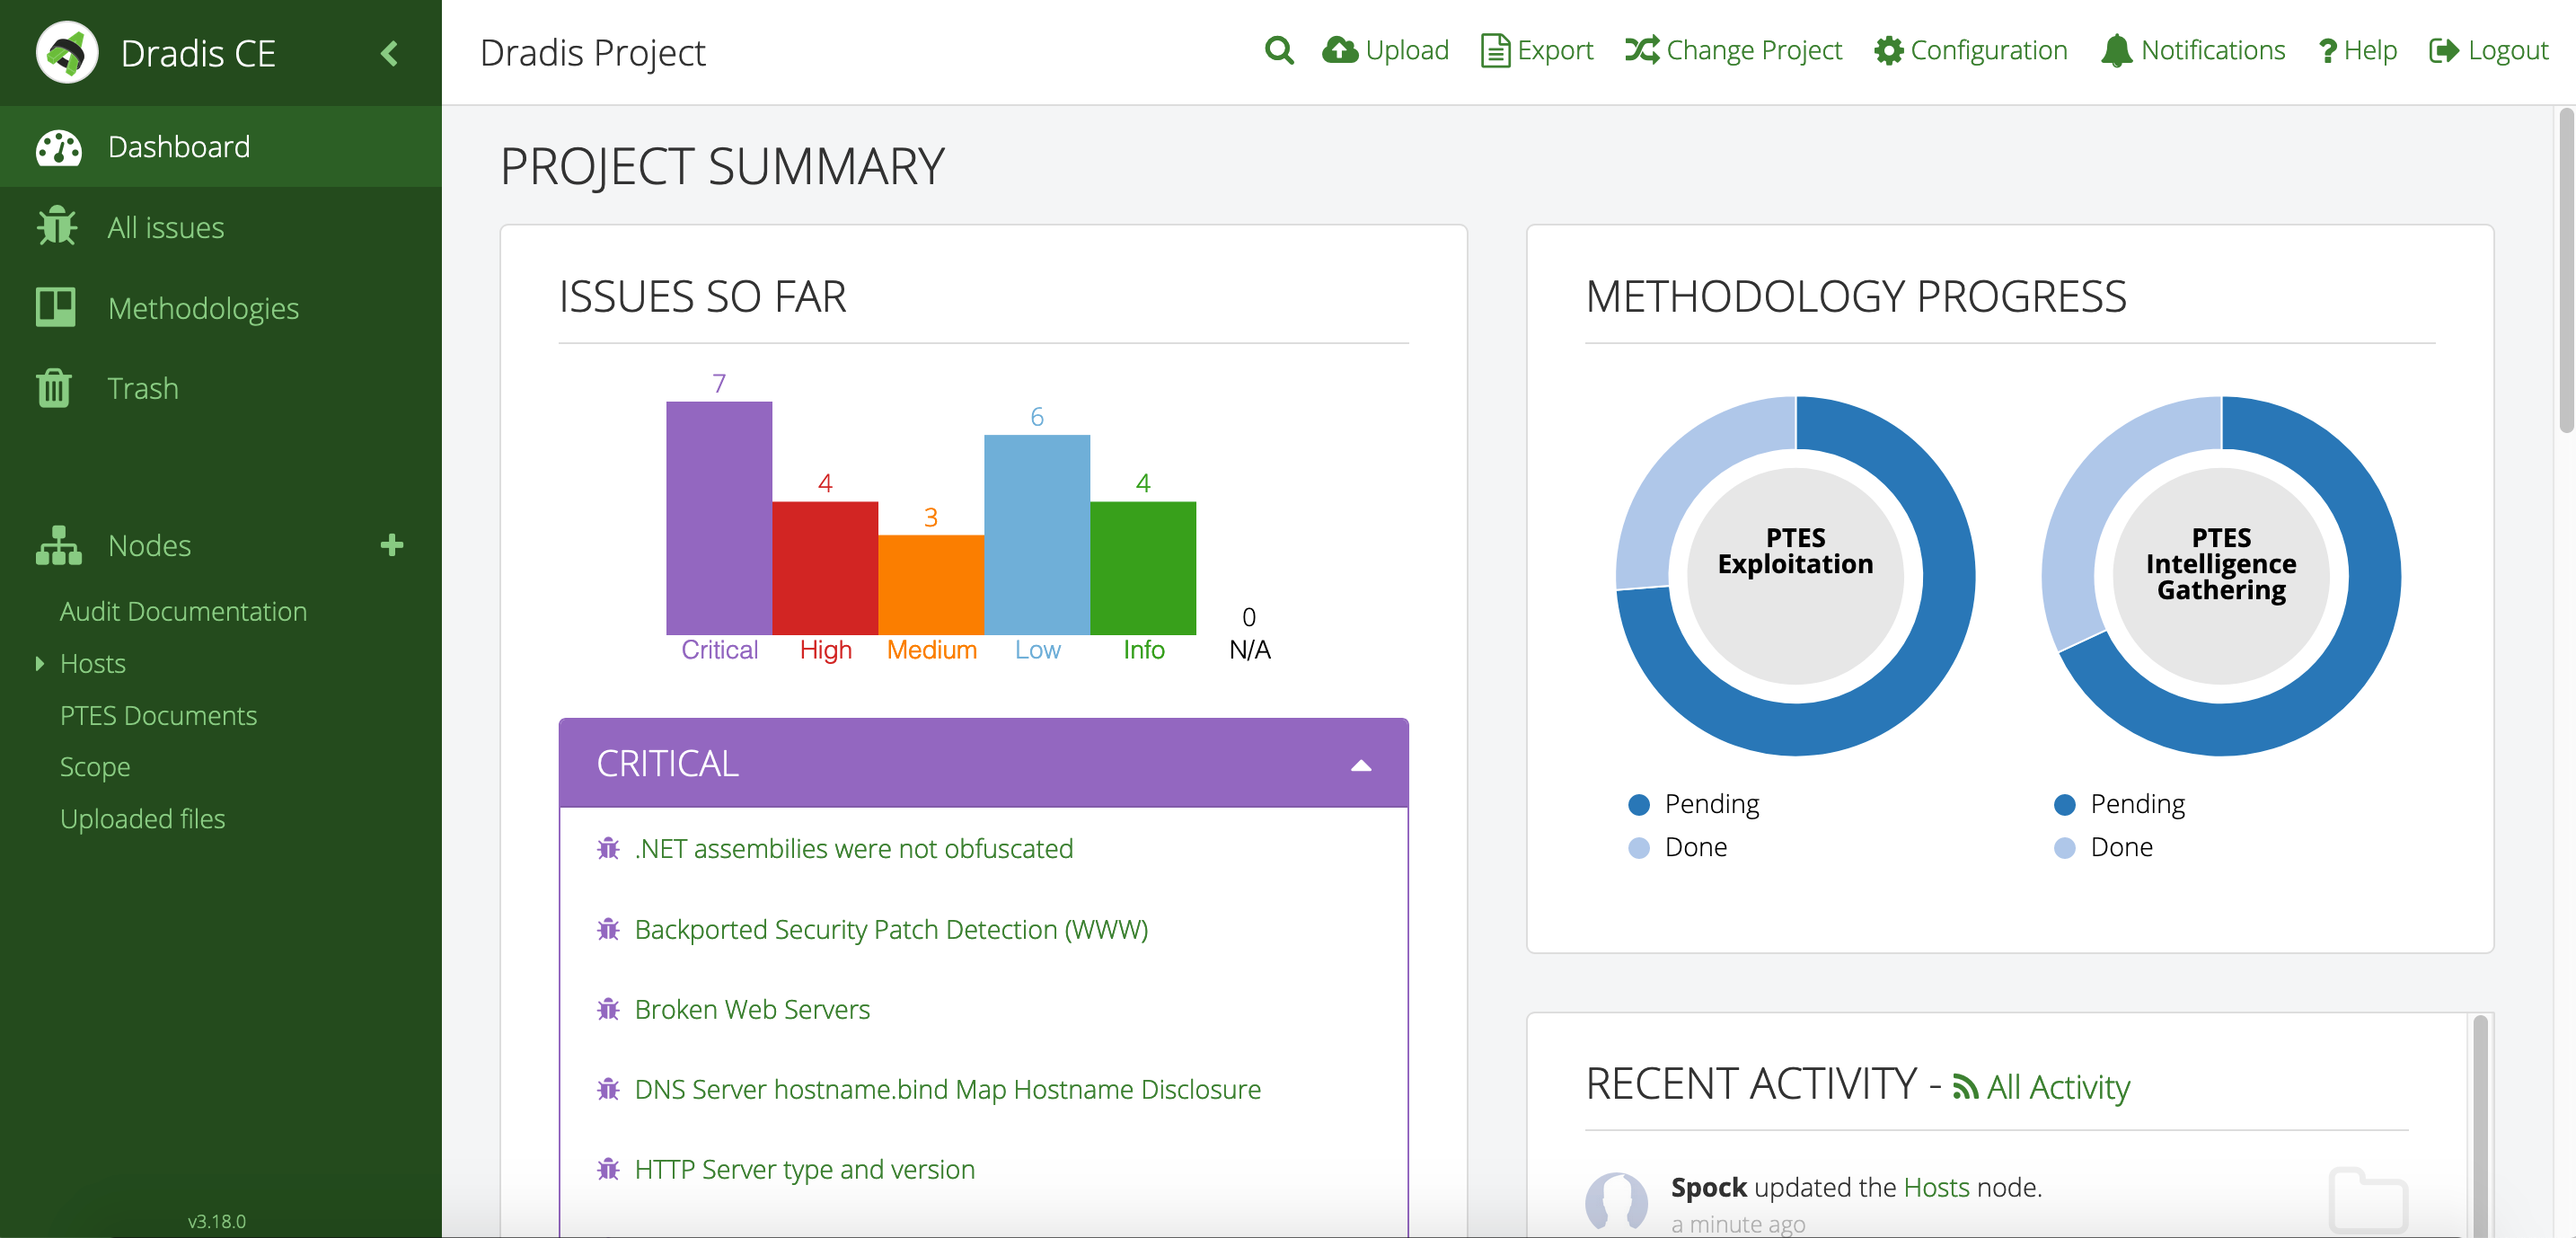 Screenshot of Dradis' Project Summary page showing Issues, Team, and Methodology progress